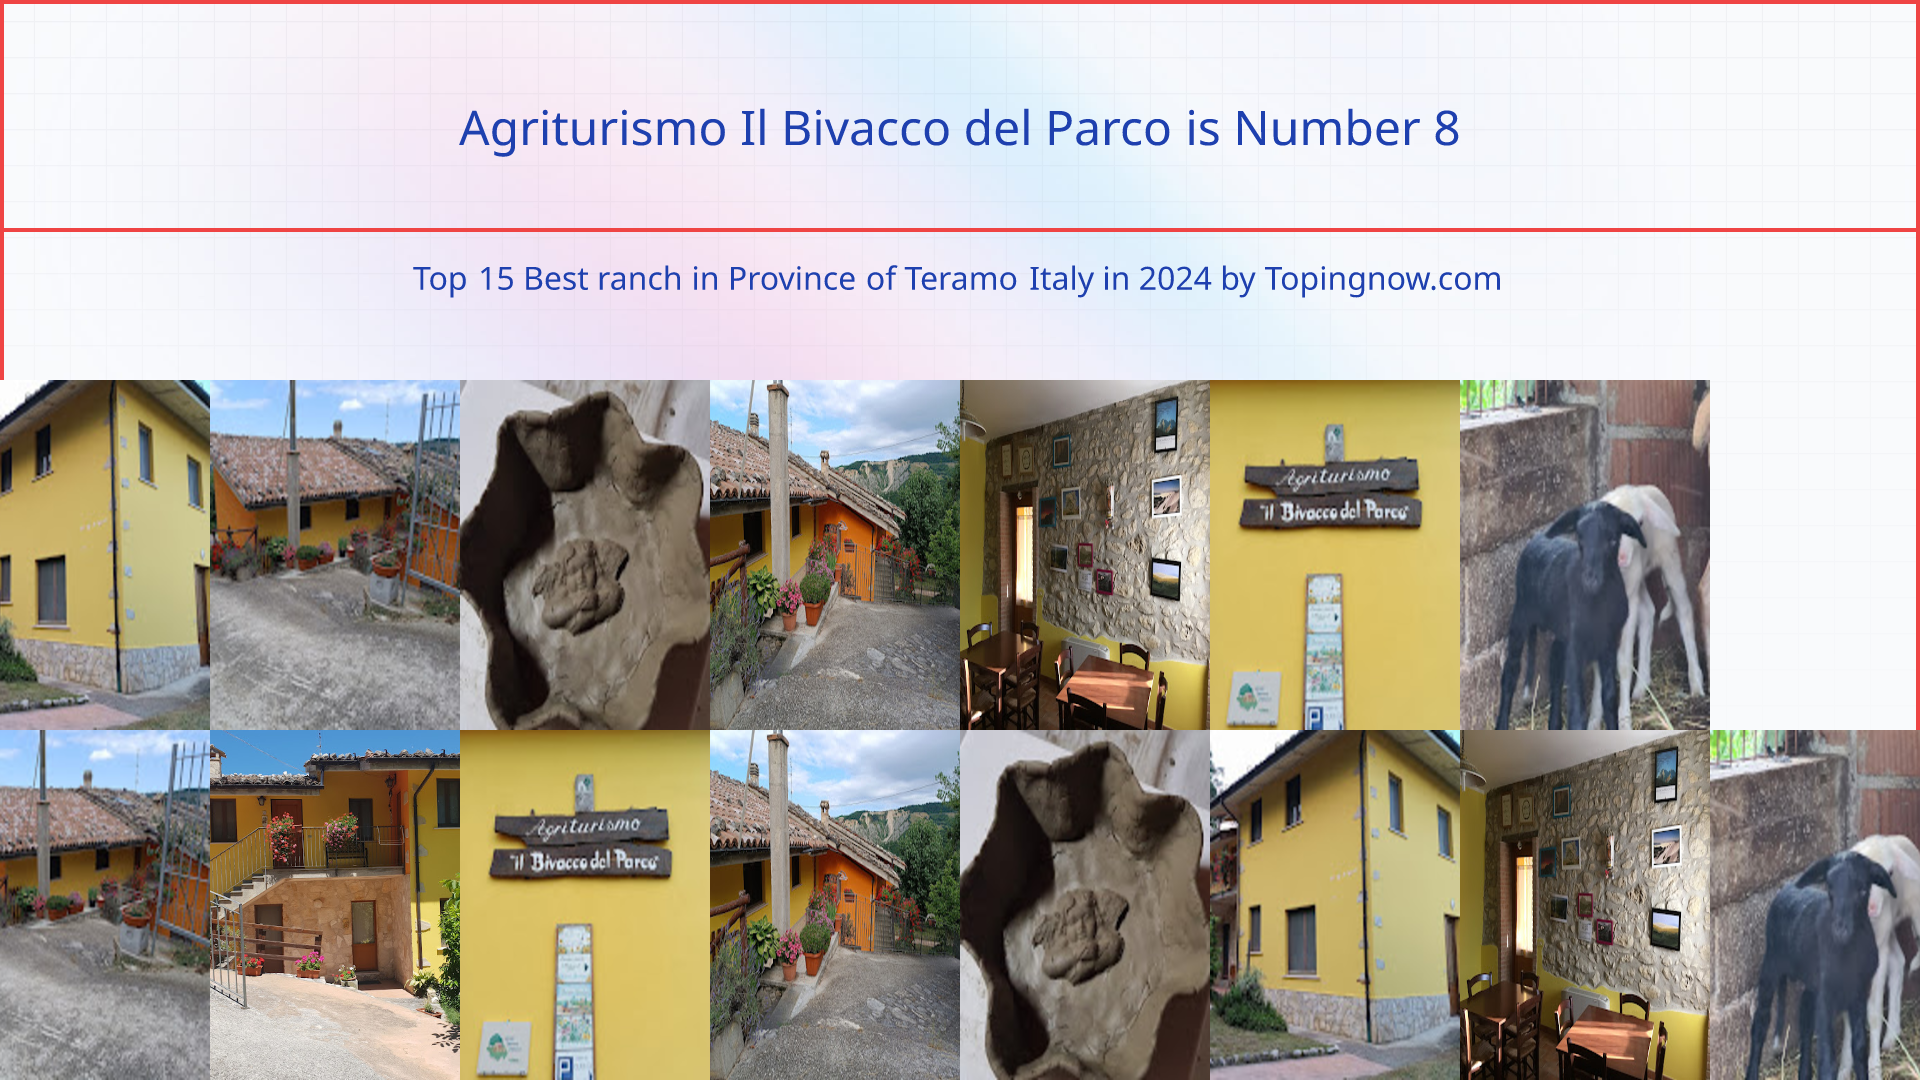 Agriturismo Il Bivacco del Parco: Top 15 Best ranch in Province of Teramo Italy in 2024